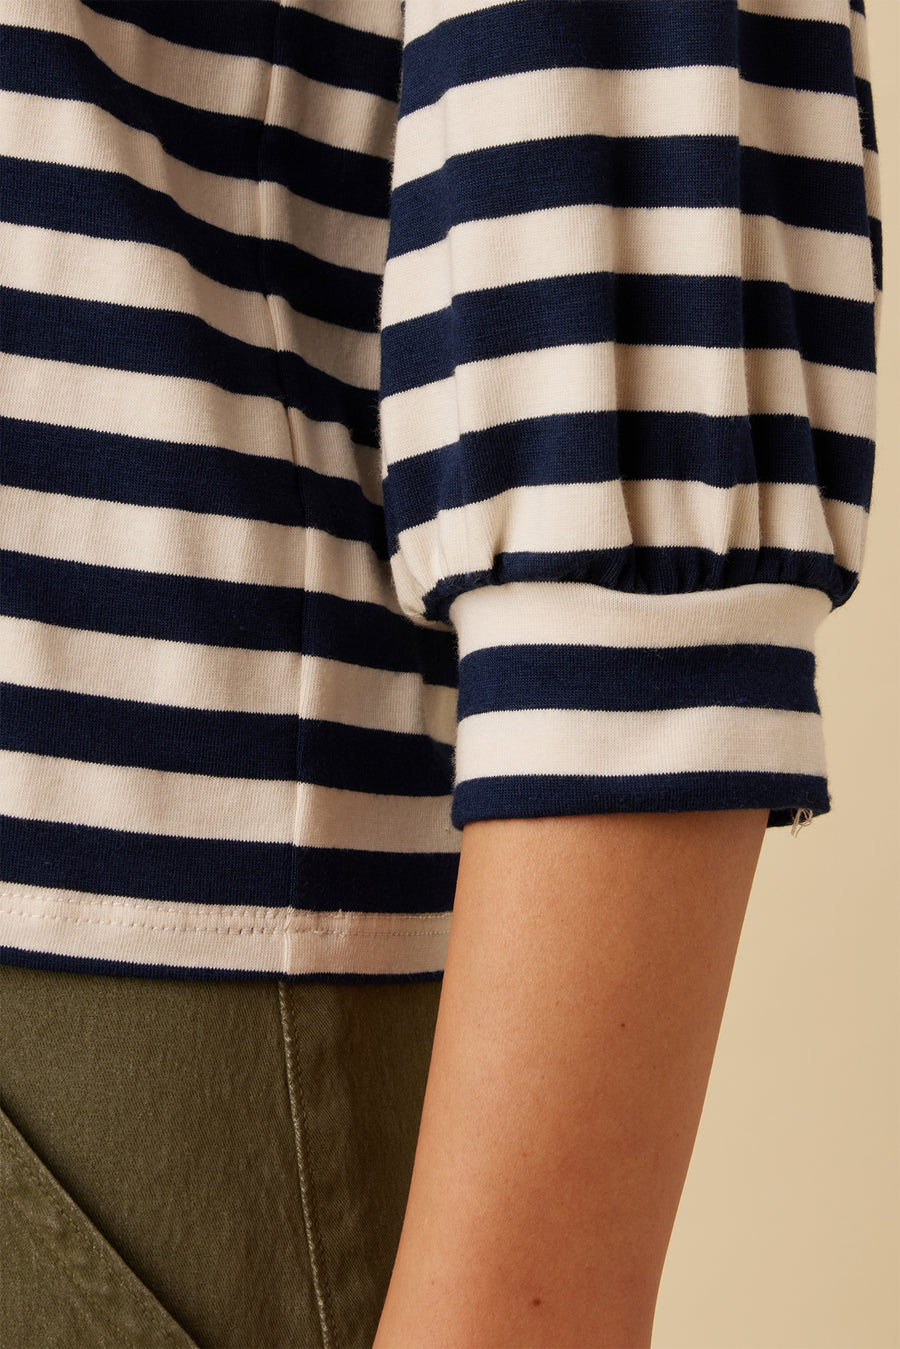 Issa Reverie Knit Tee - Navy Natural Stripe